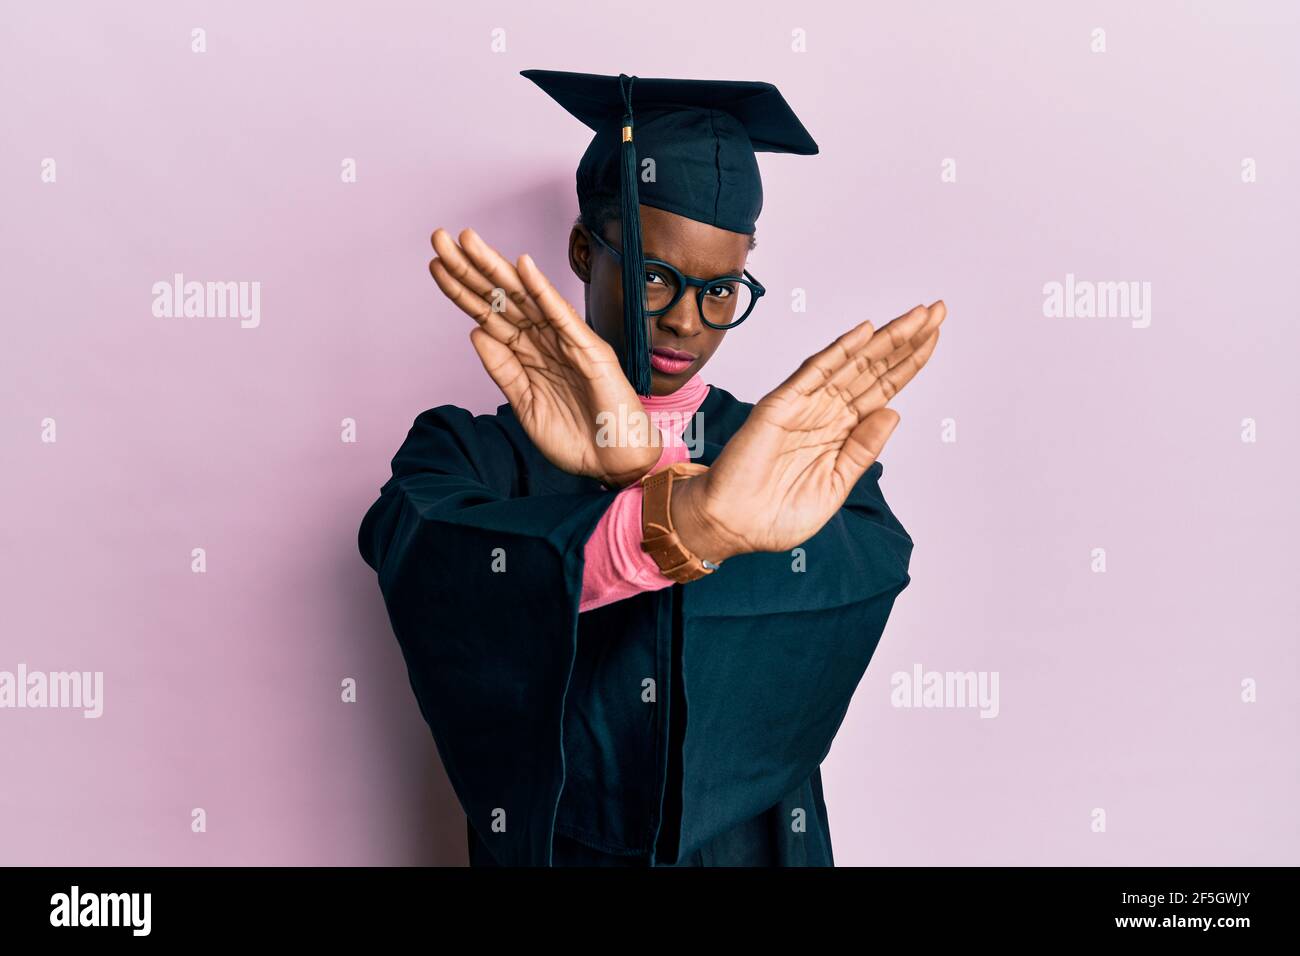 Young african american girl wearing graduation cap and ceremony robe rejection expression crossing arms and palms doing negative sign, angry face Stock Photo